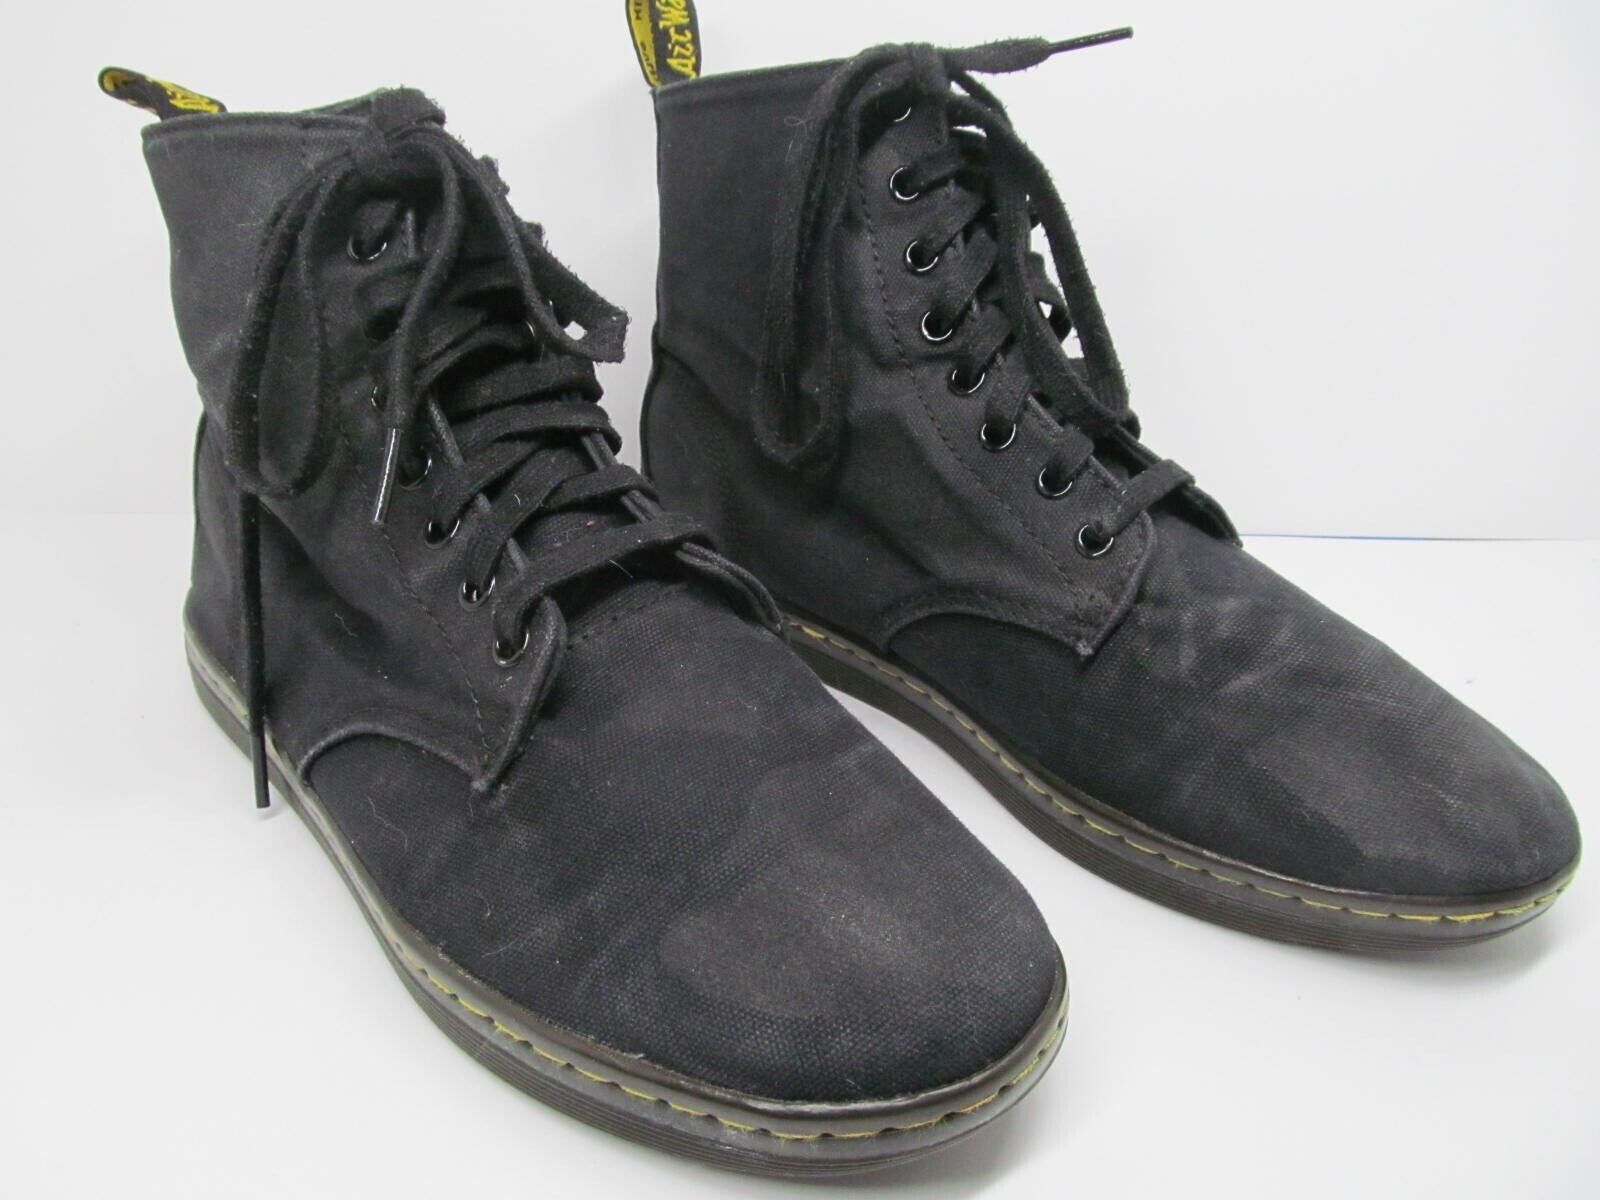 Primary image for Dr. Martens Alfie AW004 Black 8 Eye Lace Up Canvas Boots Mens US 10 Womens US 11